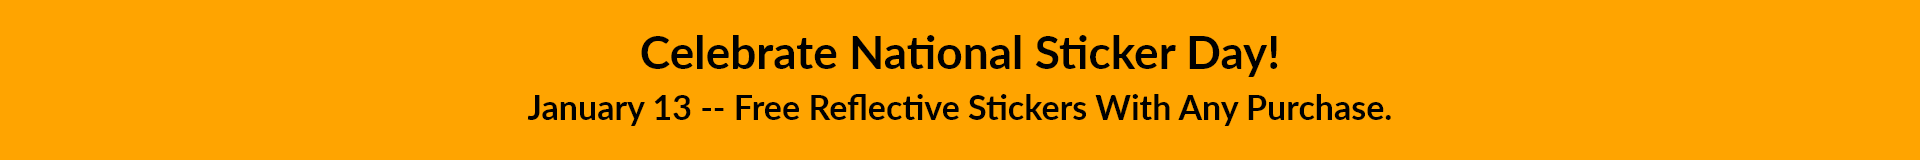 Celebrate National Sticker Day! January 13 -- Free Reflective Stickers With Any Purchase